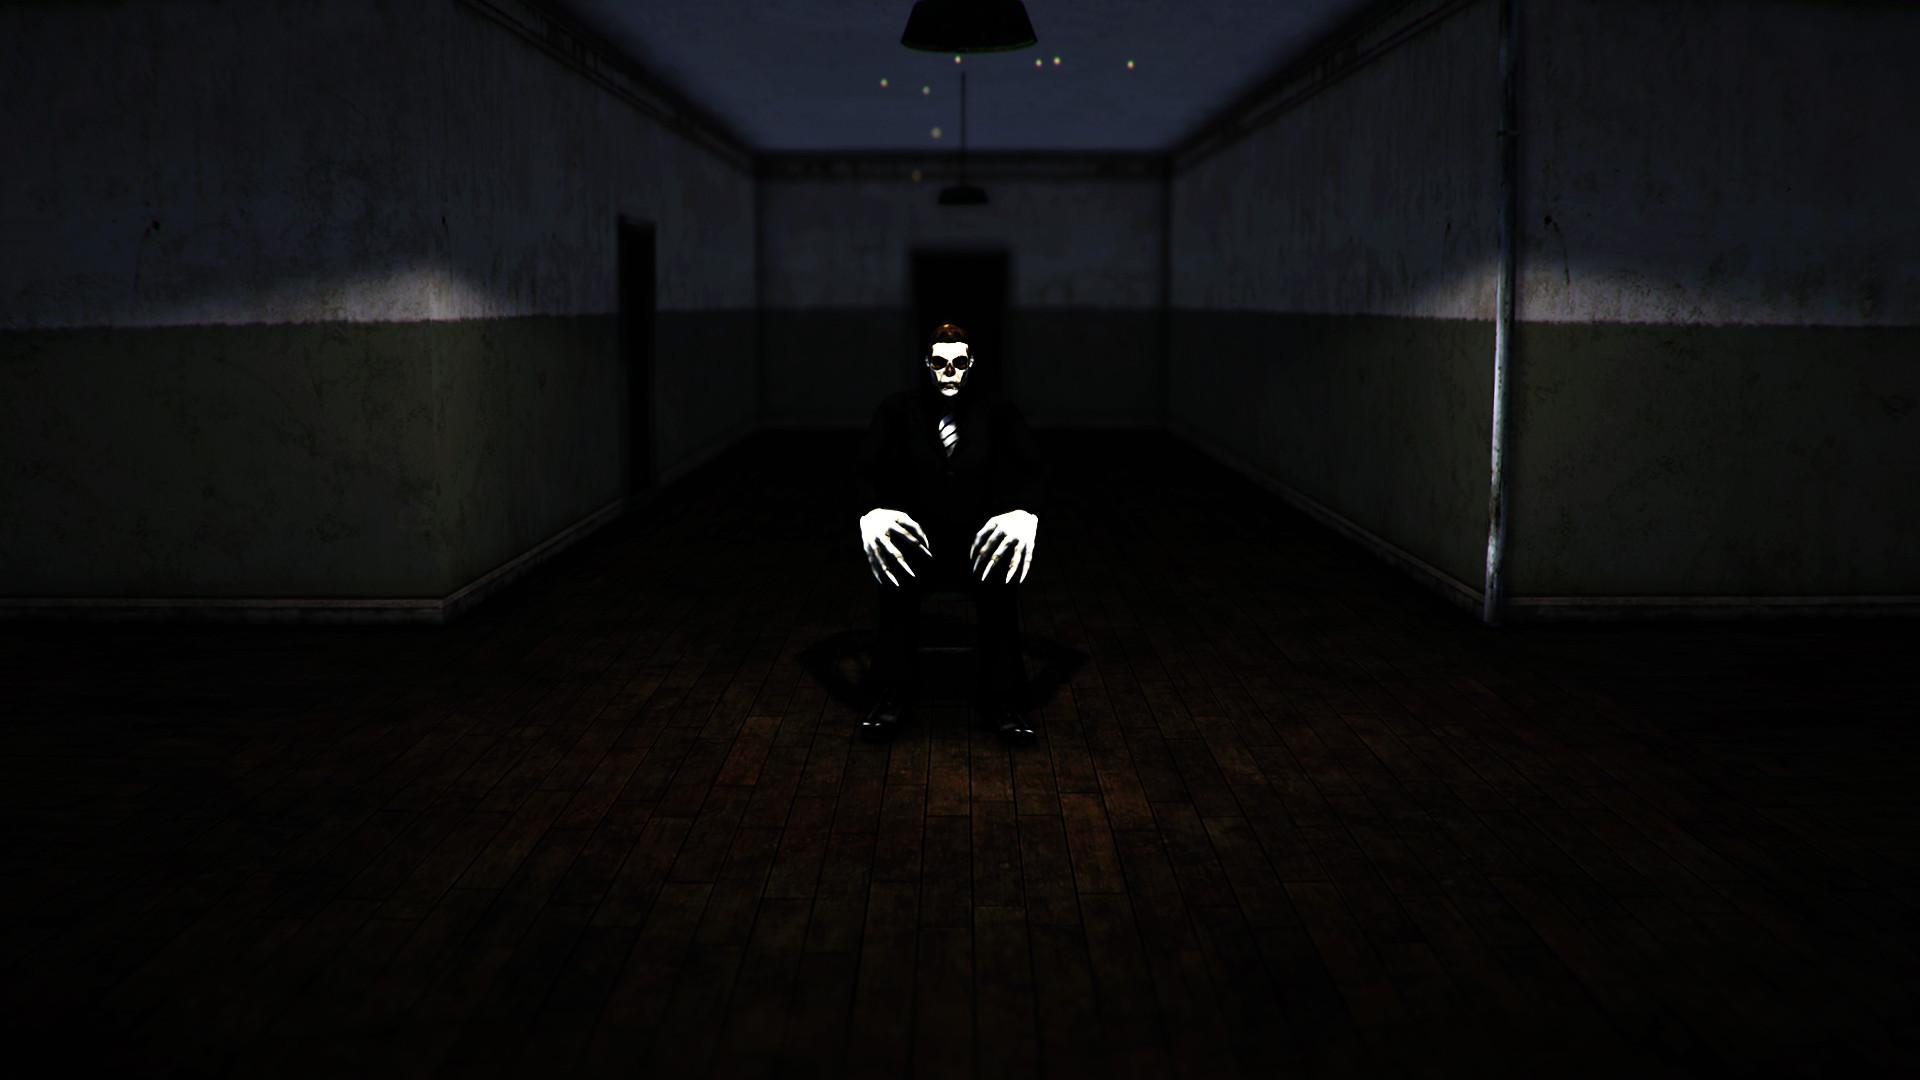 Screenshot №6 from game Insane Decay of Mind: The Labyrinth